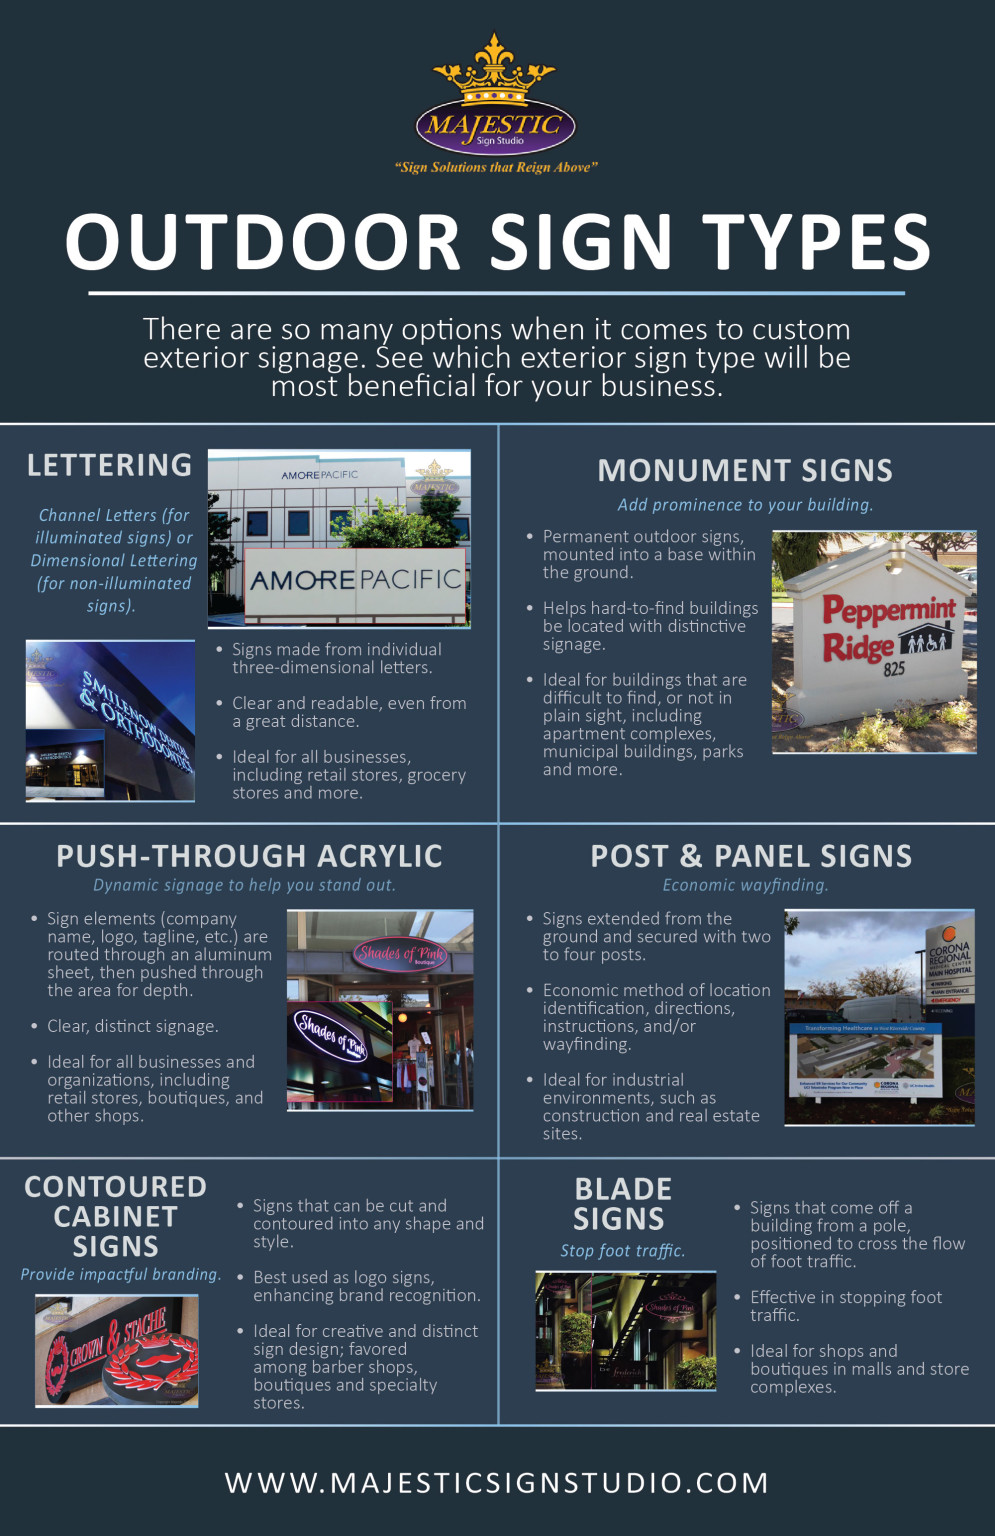 Types of outdoor signage for your business.